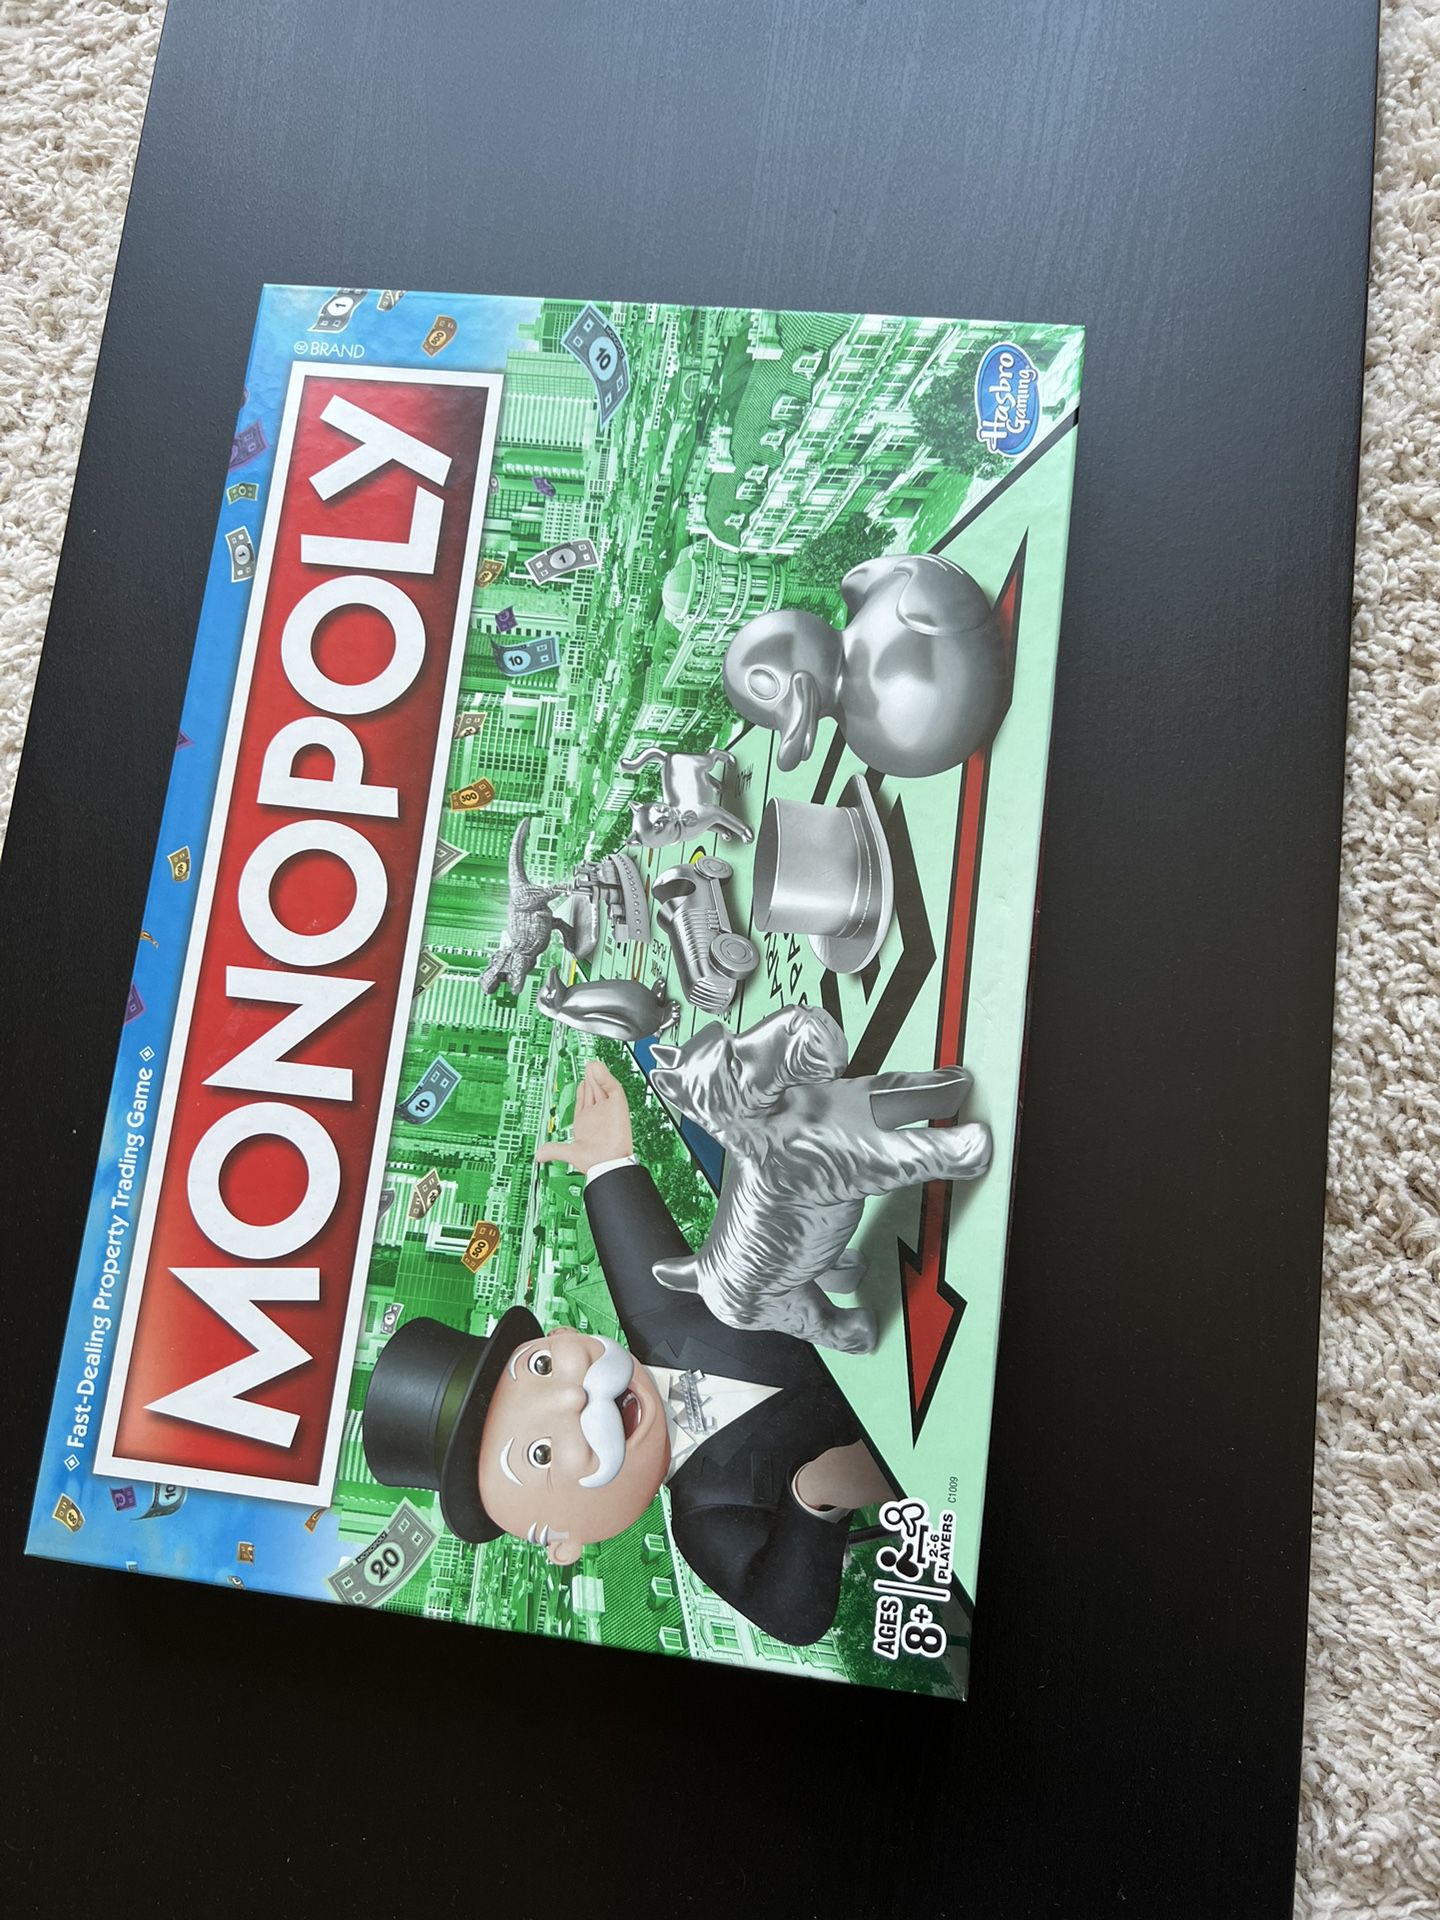 Monopoly Board Game 